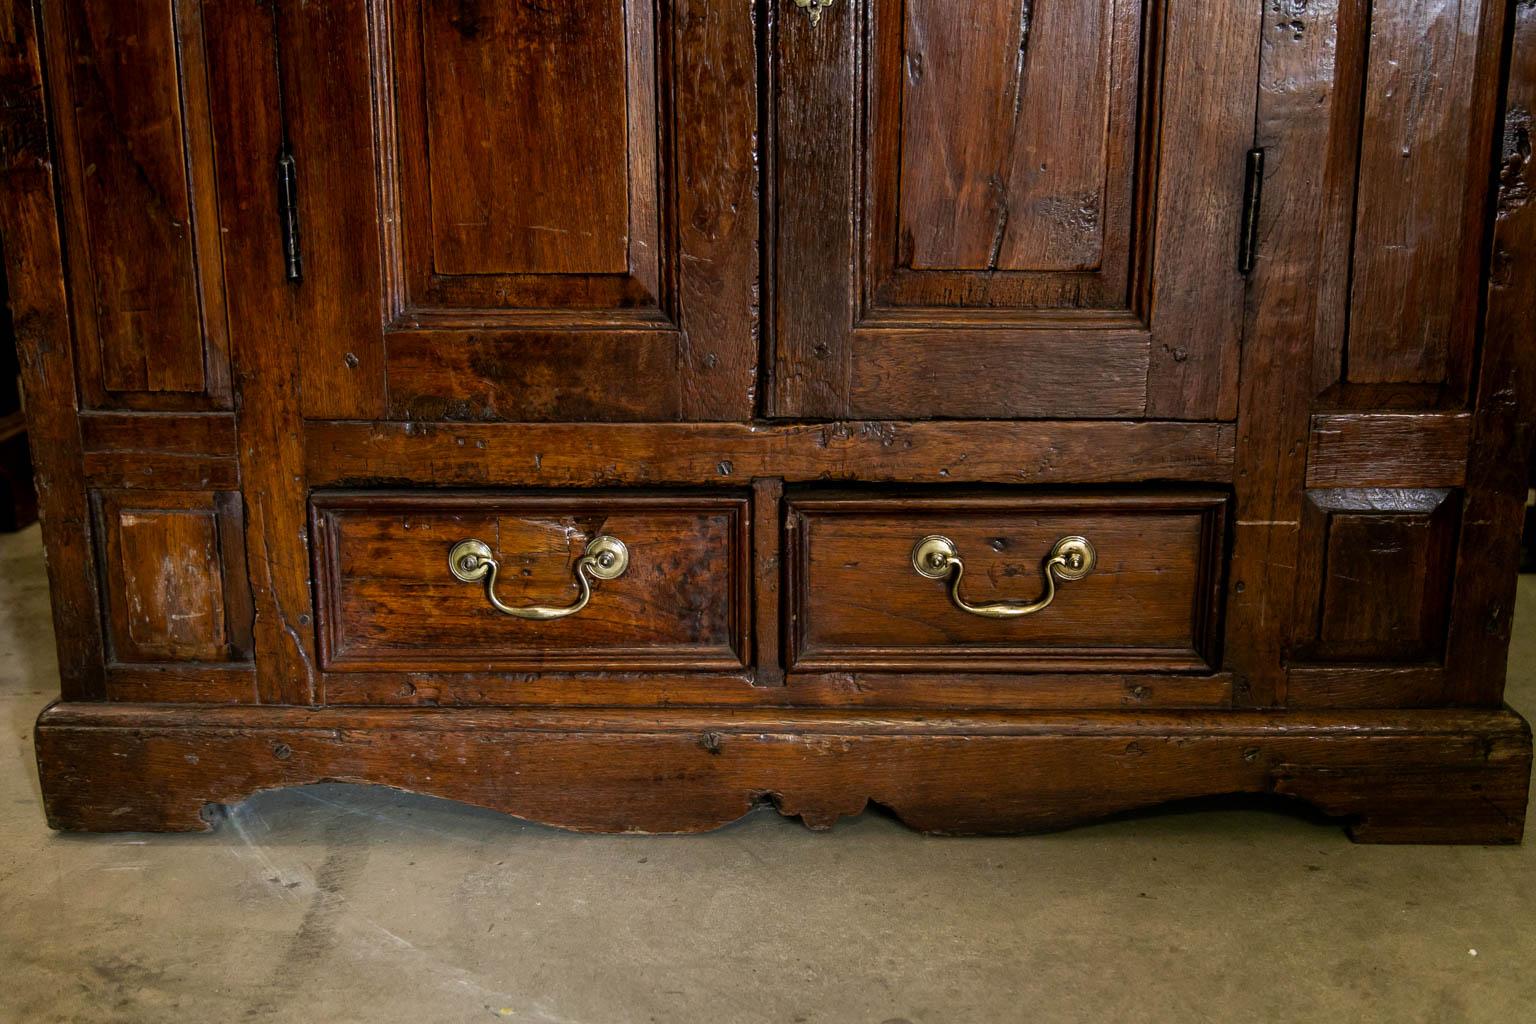 This four door/two drawer cupboard has exposed peg construction. There are raised panels on the doors and stiles. The hinges are original and brass hardware is later. The top section has one fixed shelf. The lower section is open.